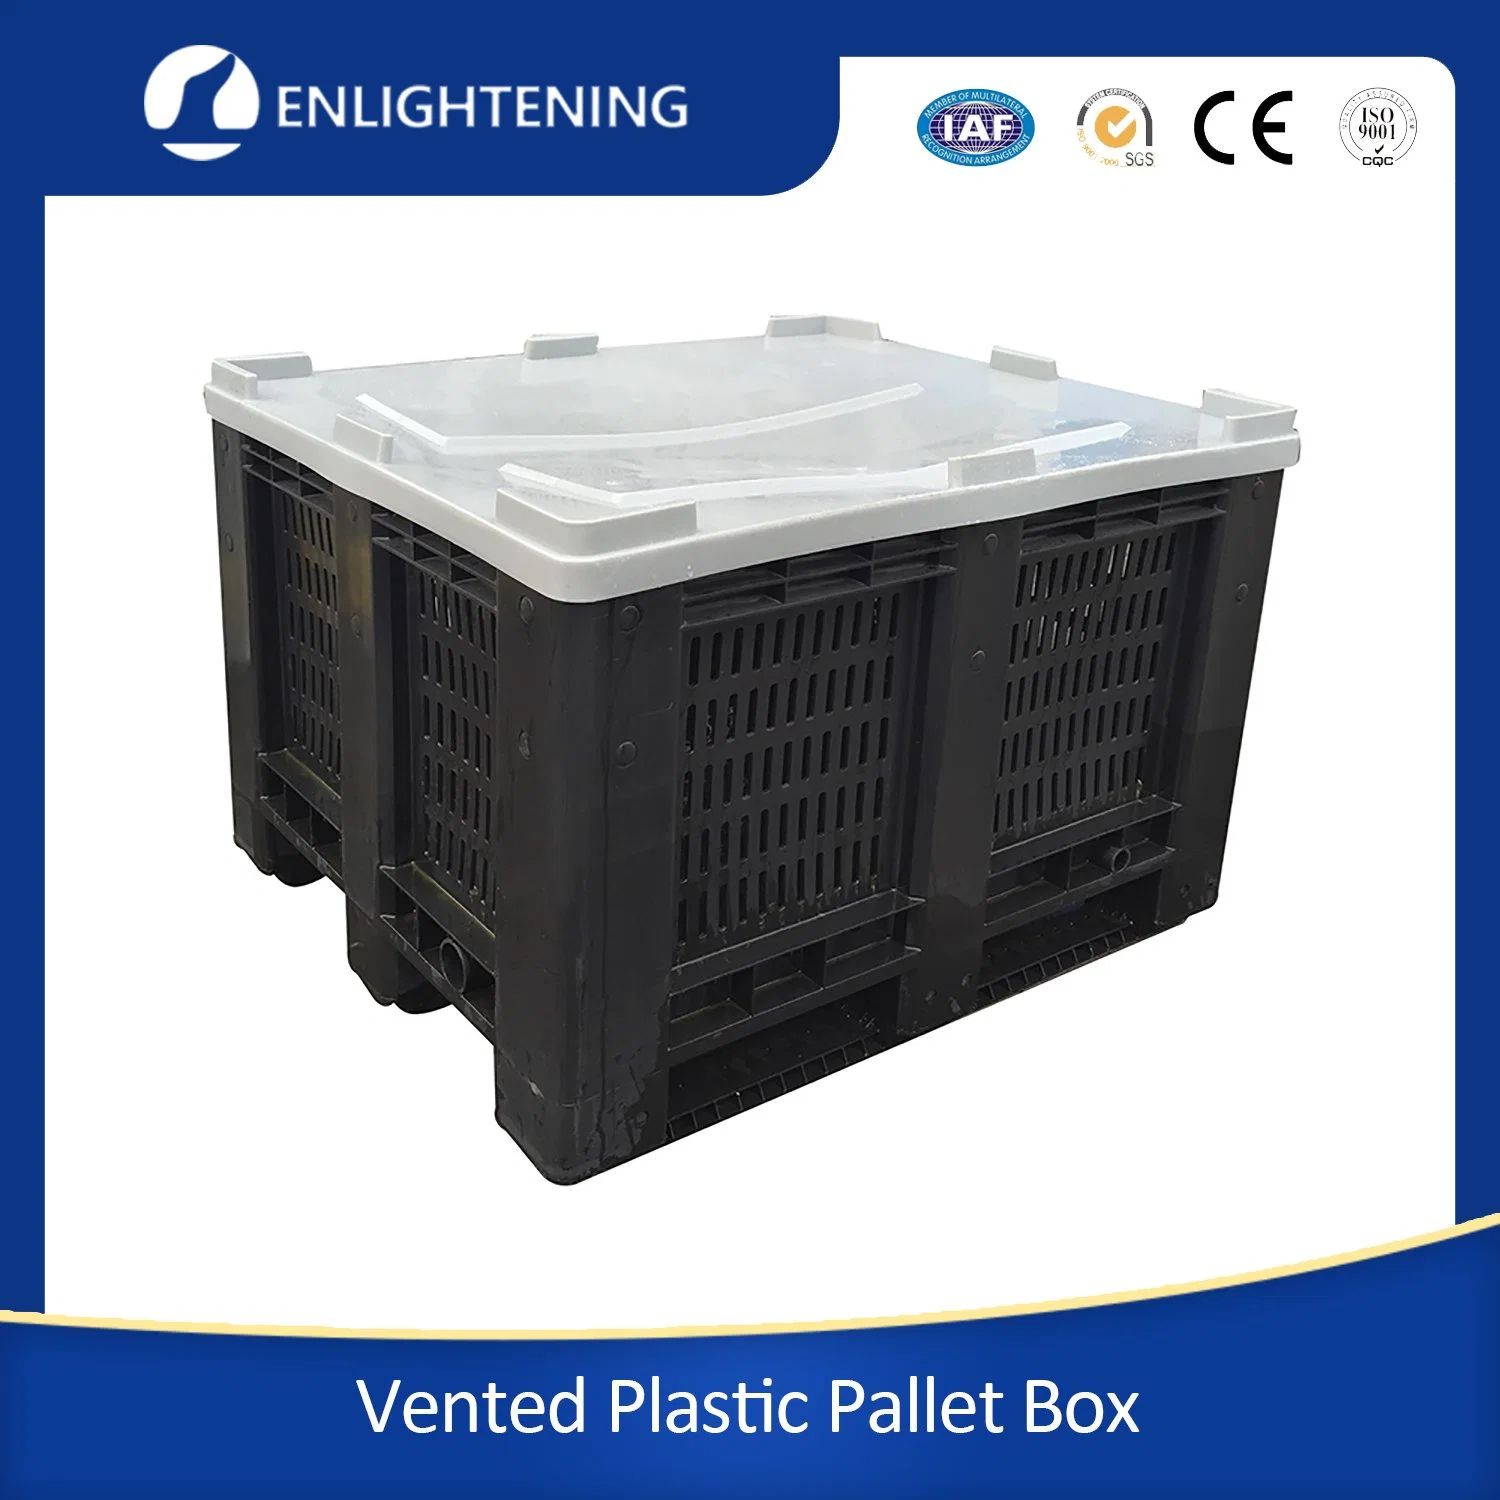 Agriculture Virgin HDPE Vented Bulk Plastic Pallet Bin Container with Lid